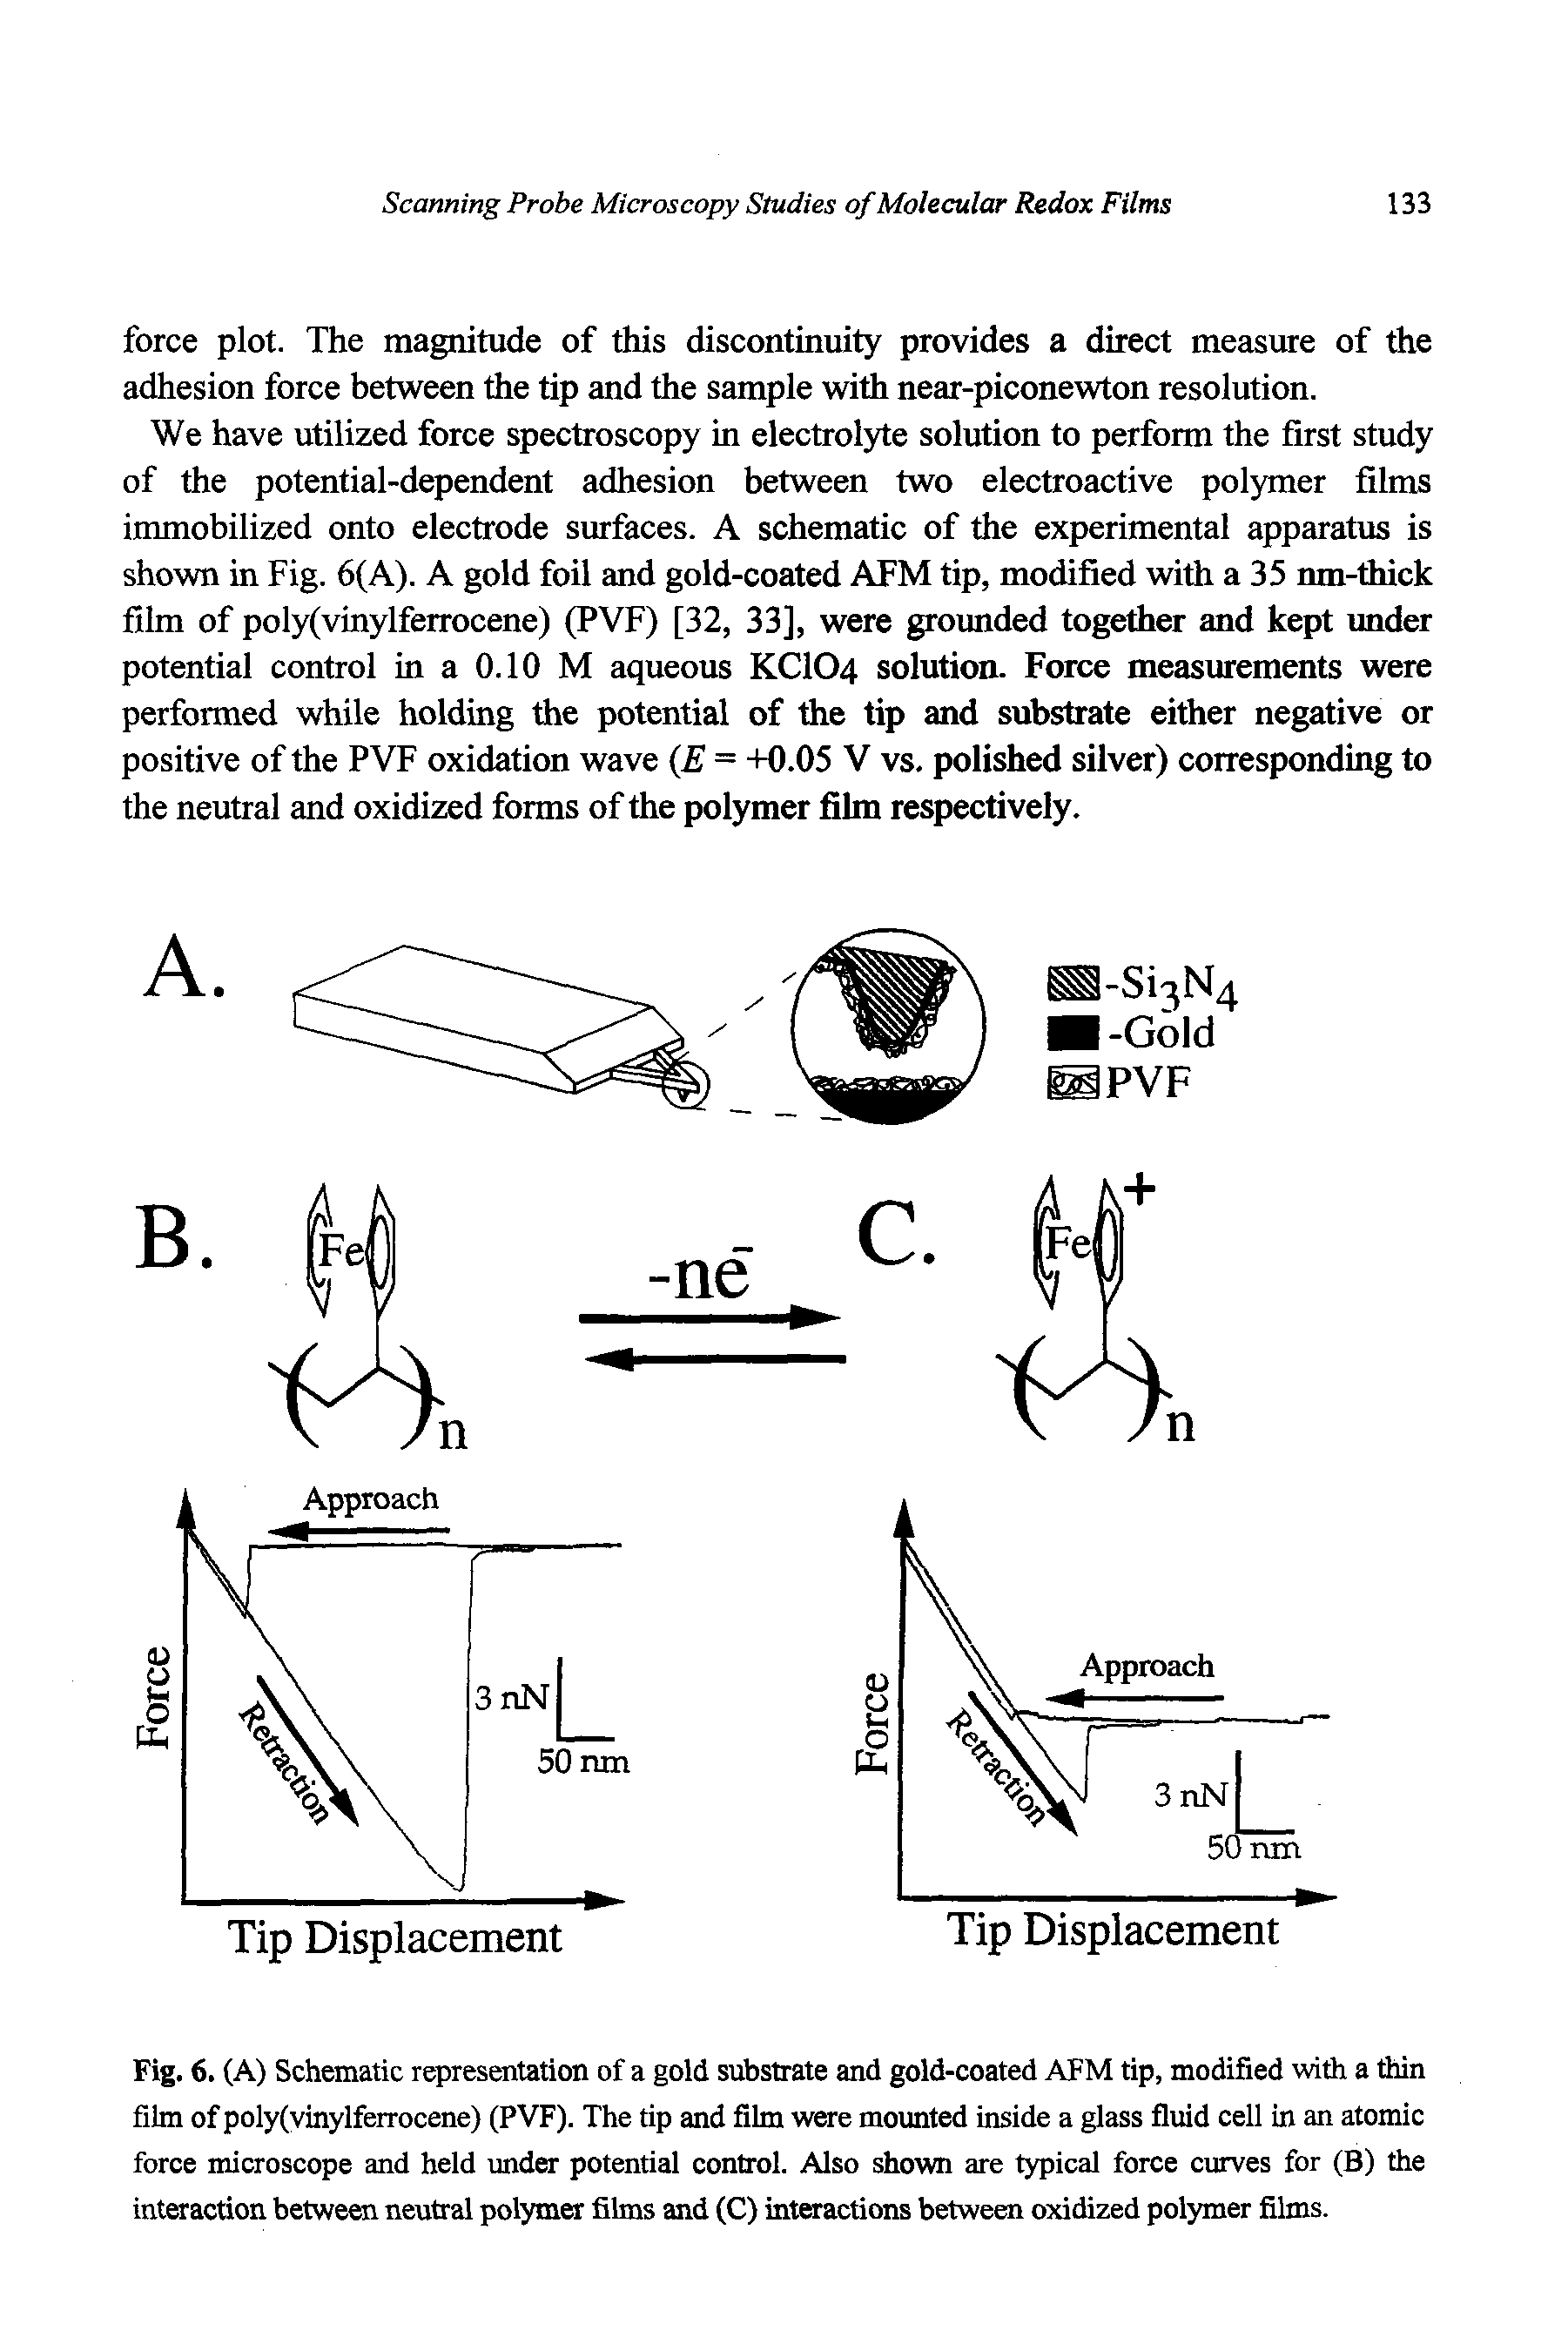 Fig. 6. (A) Schematic representation of a gold substrate and gold-coated AFM tip, modified with a thin film of poly(vinylferrocene) (PVF). The tip and film were mounted inside a glass fluid cell in an atomic force microscope and held under potential control. Also shown are typical force curves for (B) the interaction between neutral polymer films and (C) interactions between oxidized polymer films.